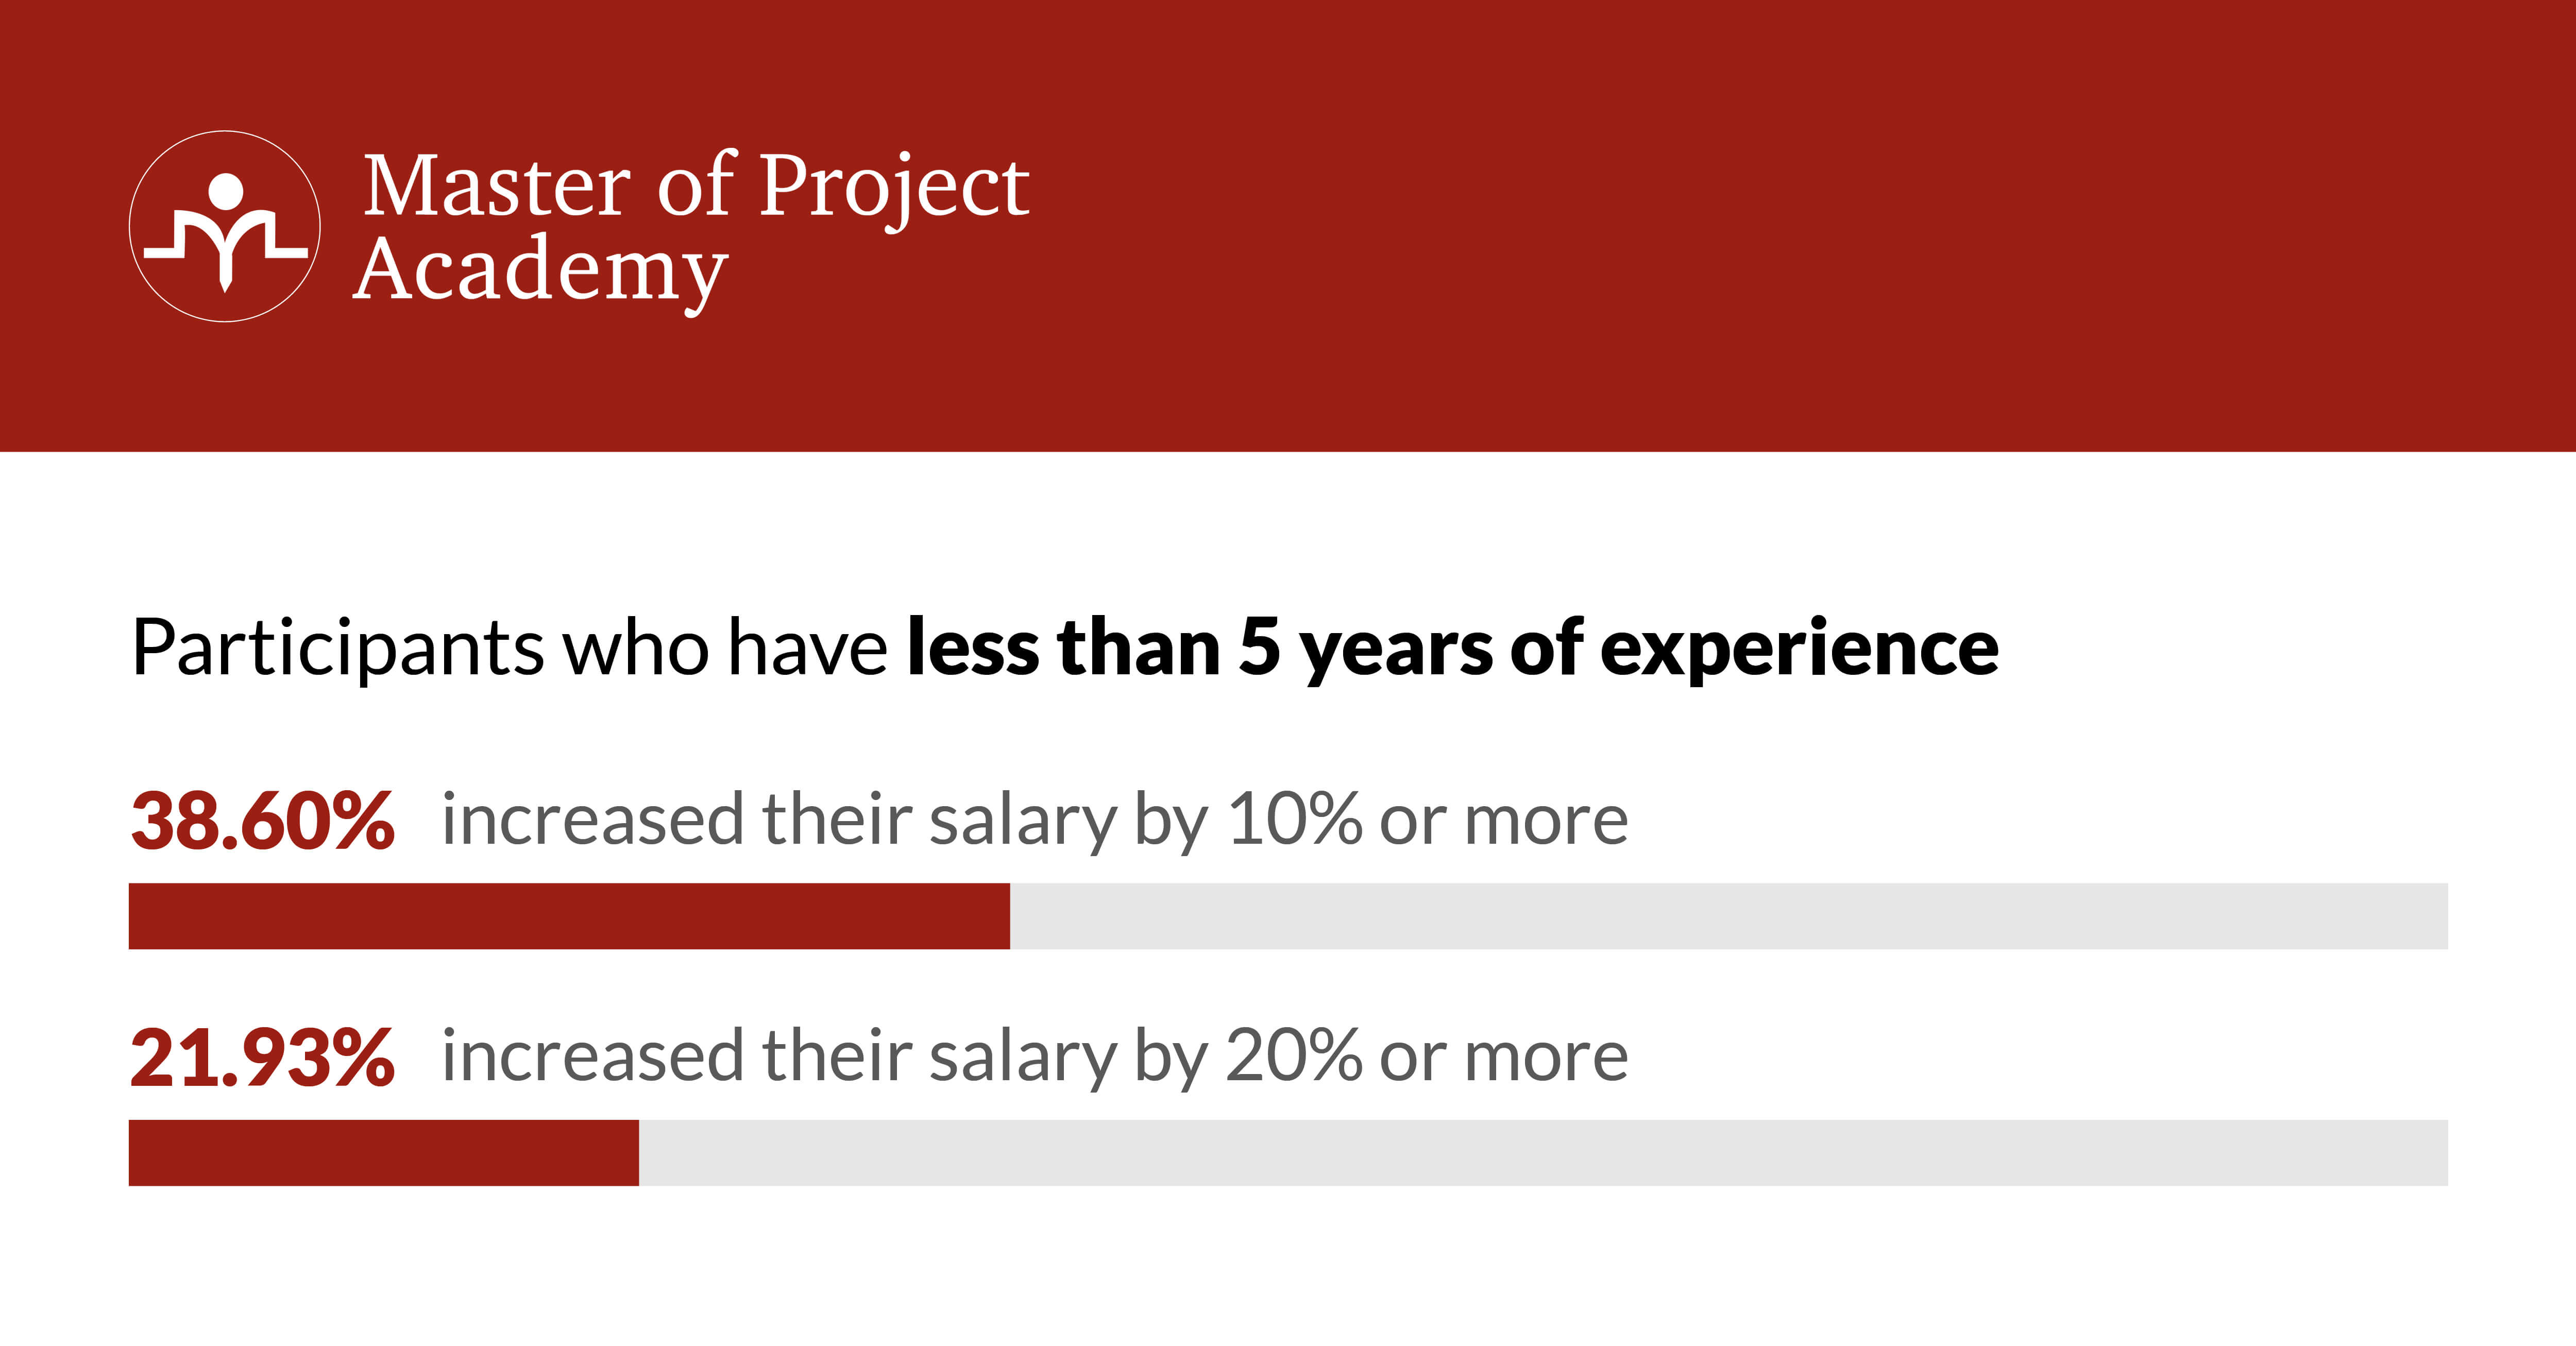 Participants who have less than 5 years of experience: 38.60% increased their salary by 10% or more and 21.93% increased their salary by 20% or more.